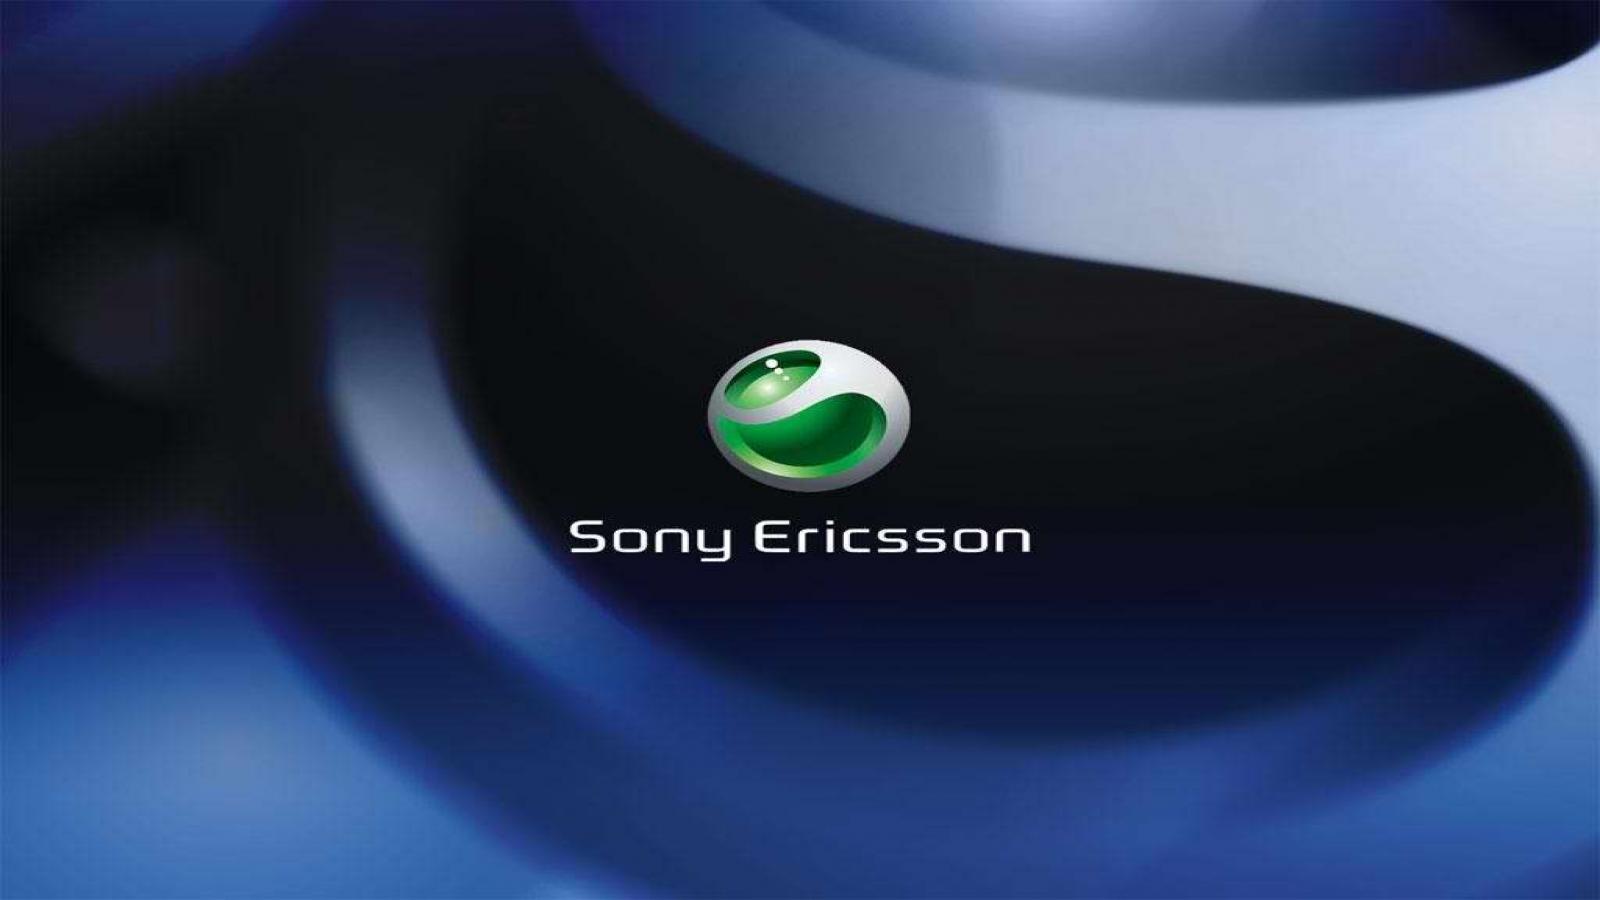 Sony Ericsson HD Wallpaper For All Resolution Brand